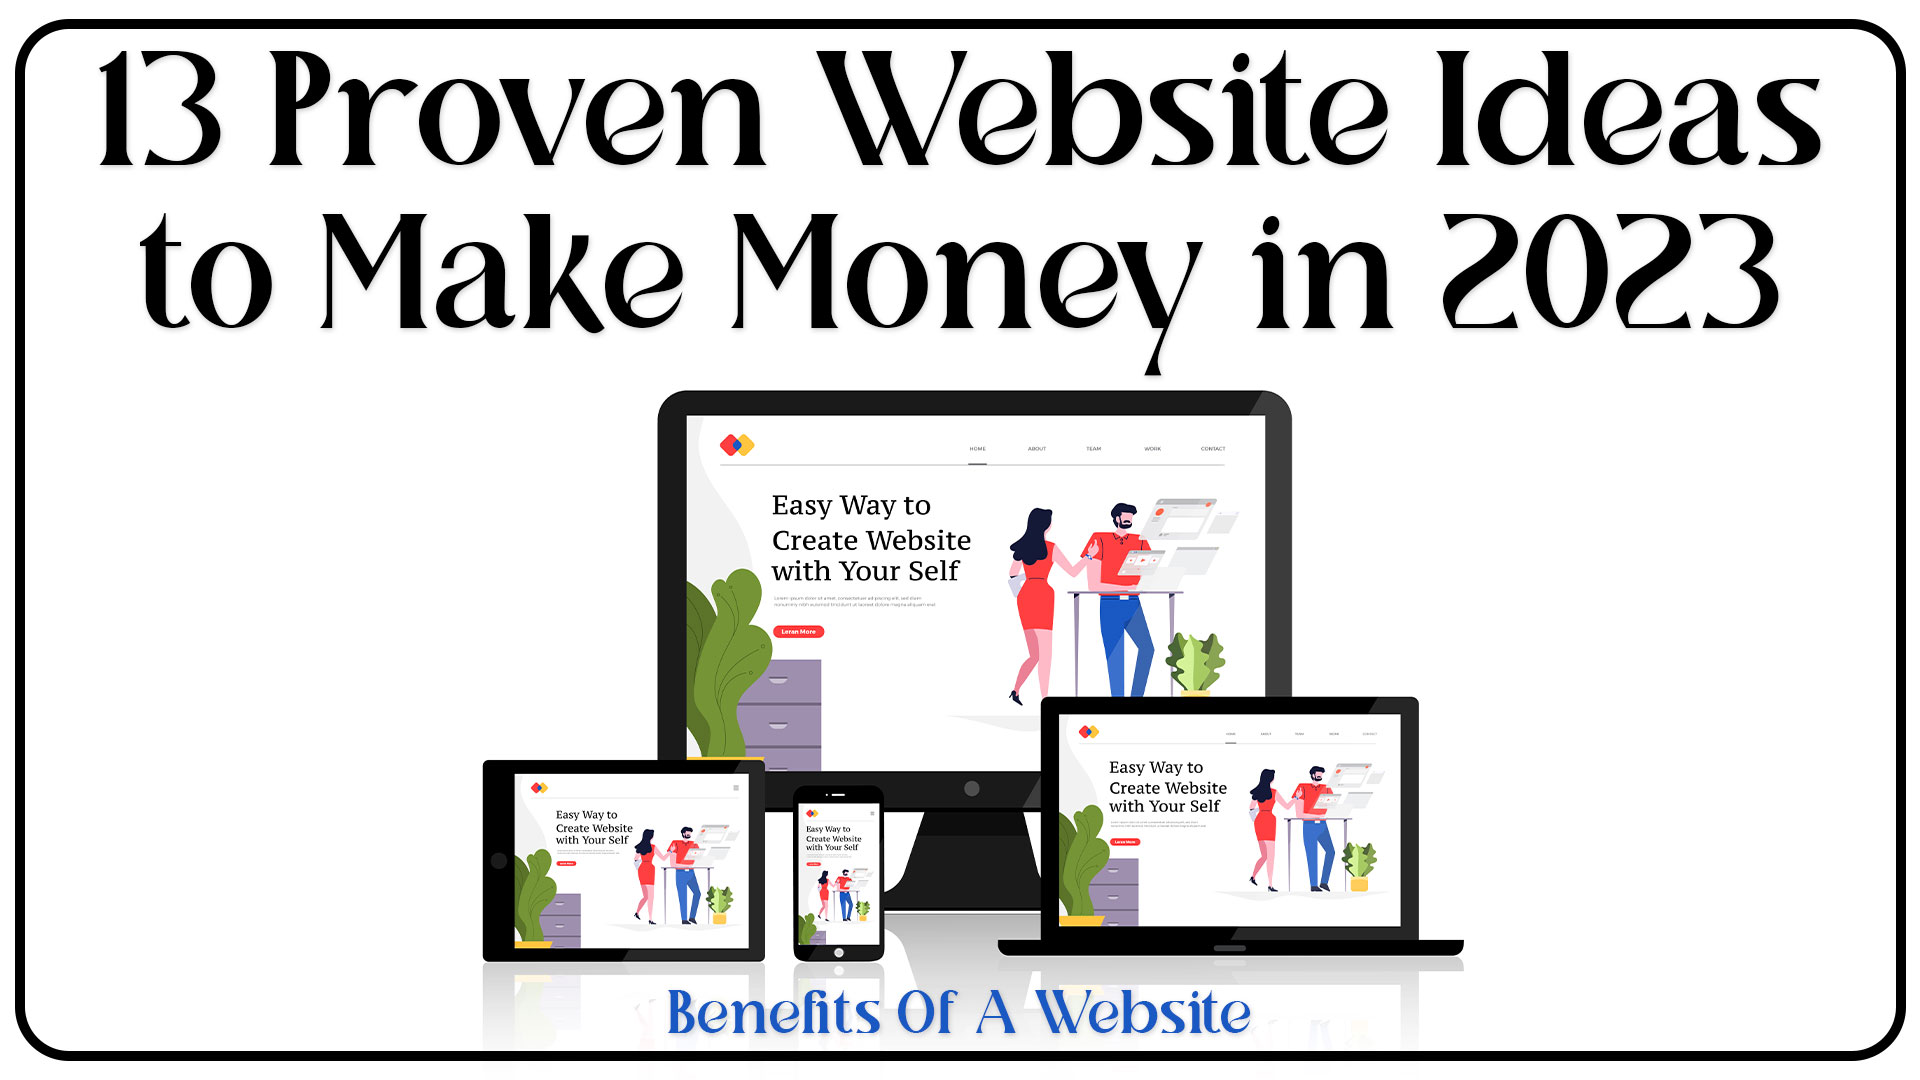 13 Proven Website Ideas to Make Money in 2023 | Benefits Of A Website